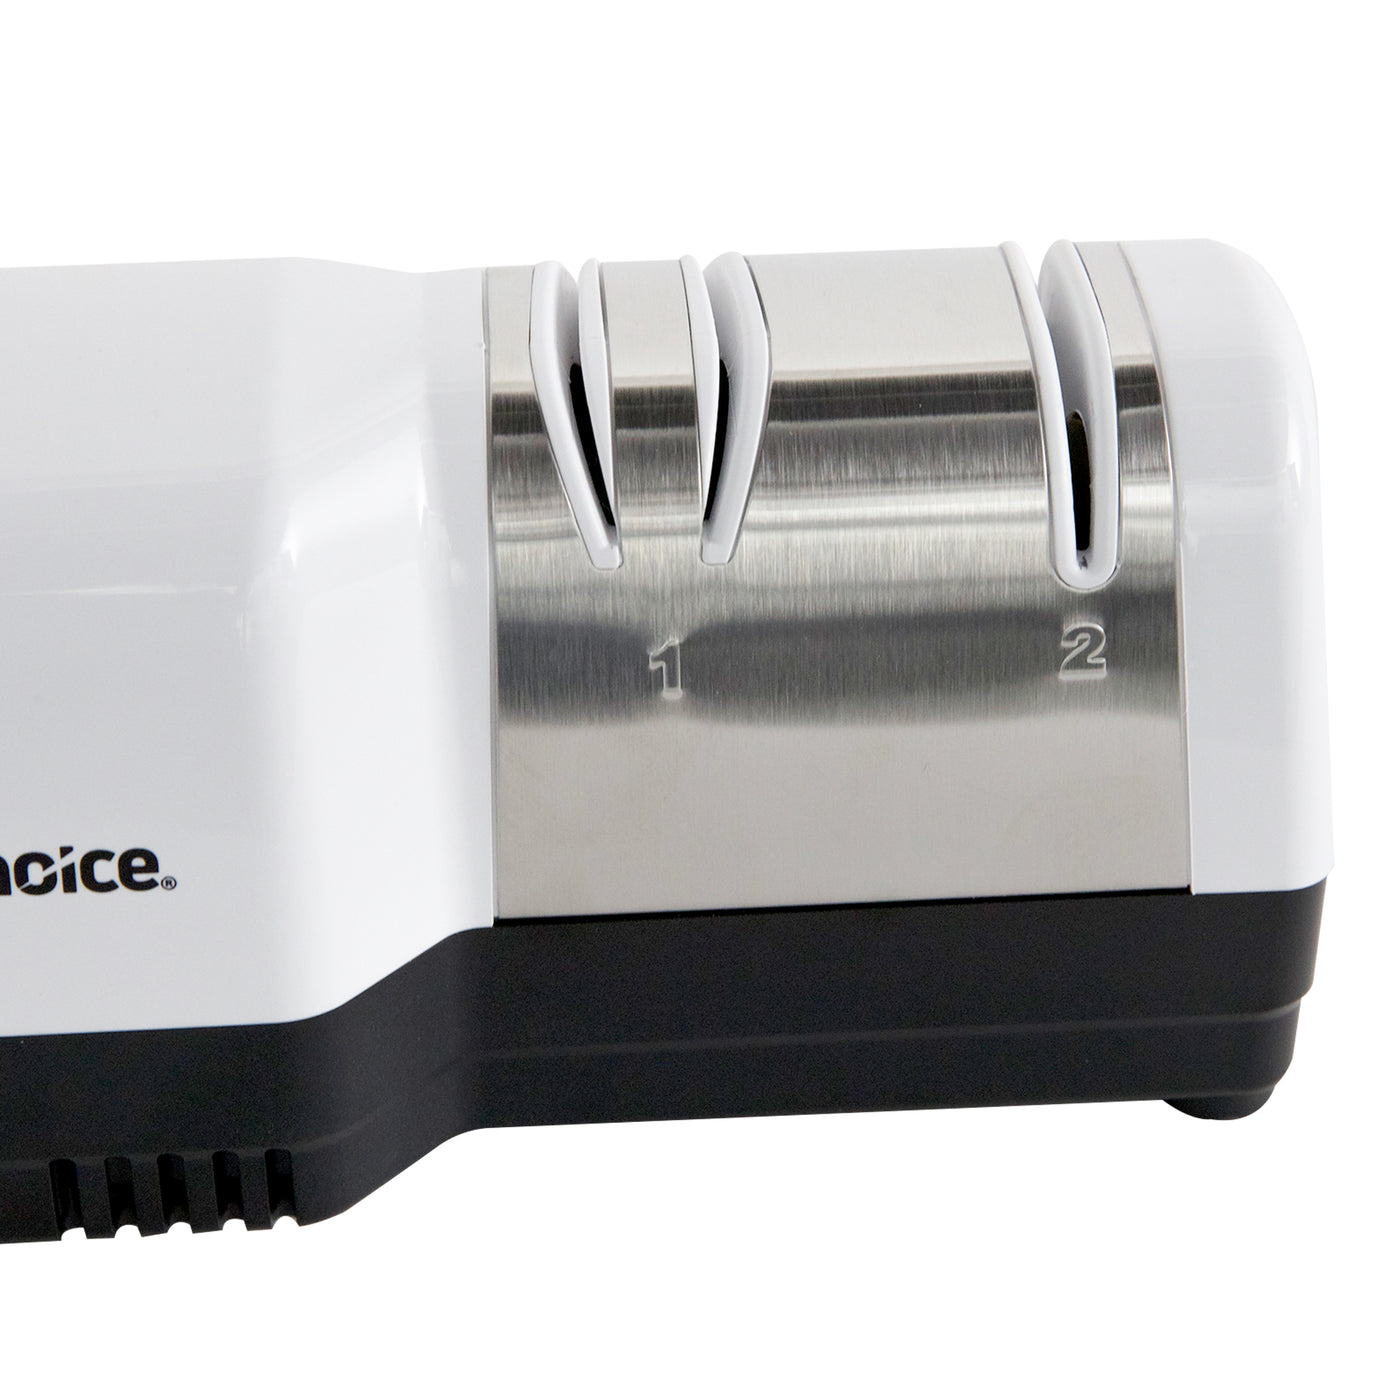 Chef's Choice Electric Knife Sharpener - 14 Degree – Cutlery and More